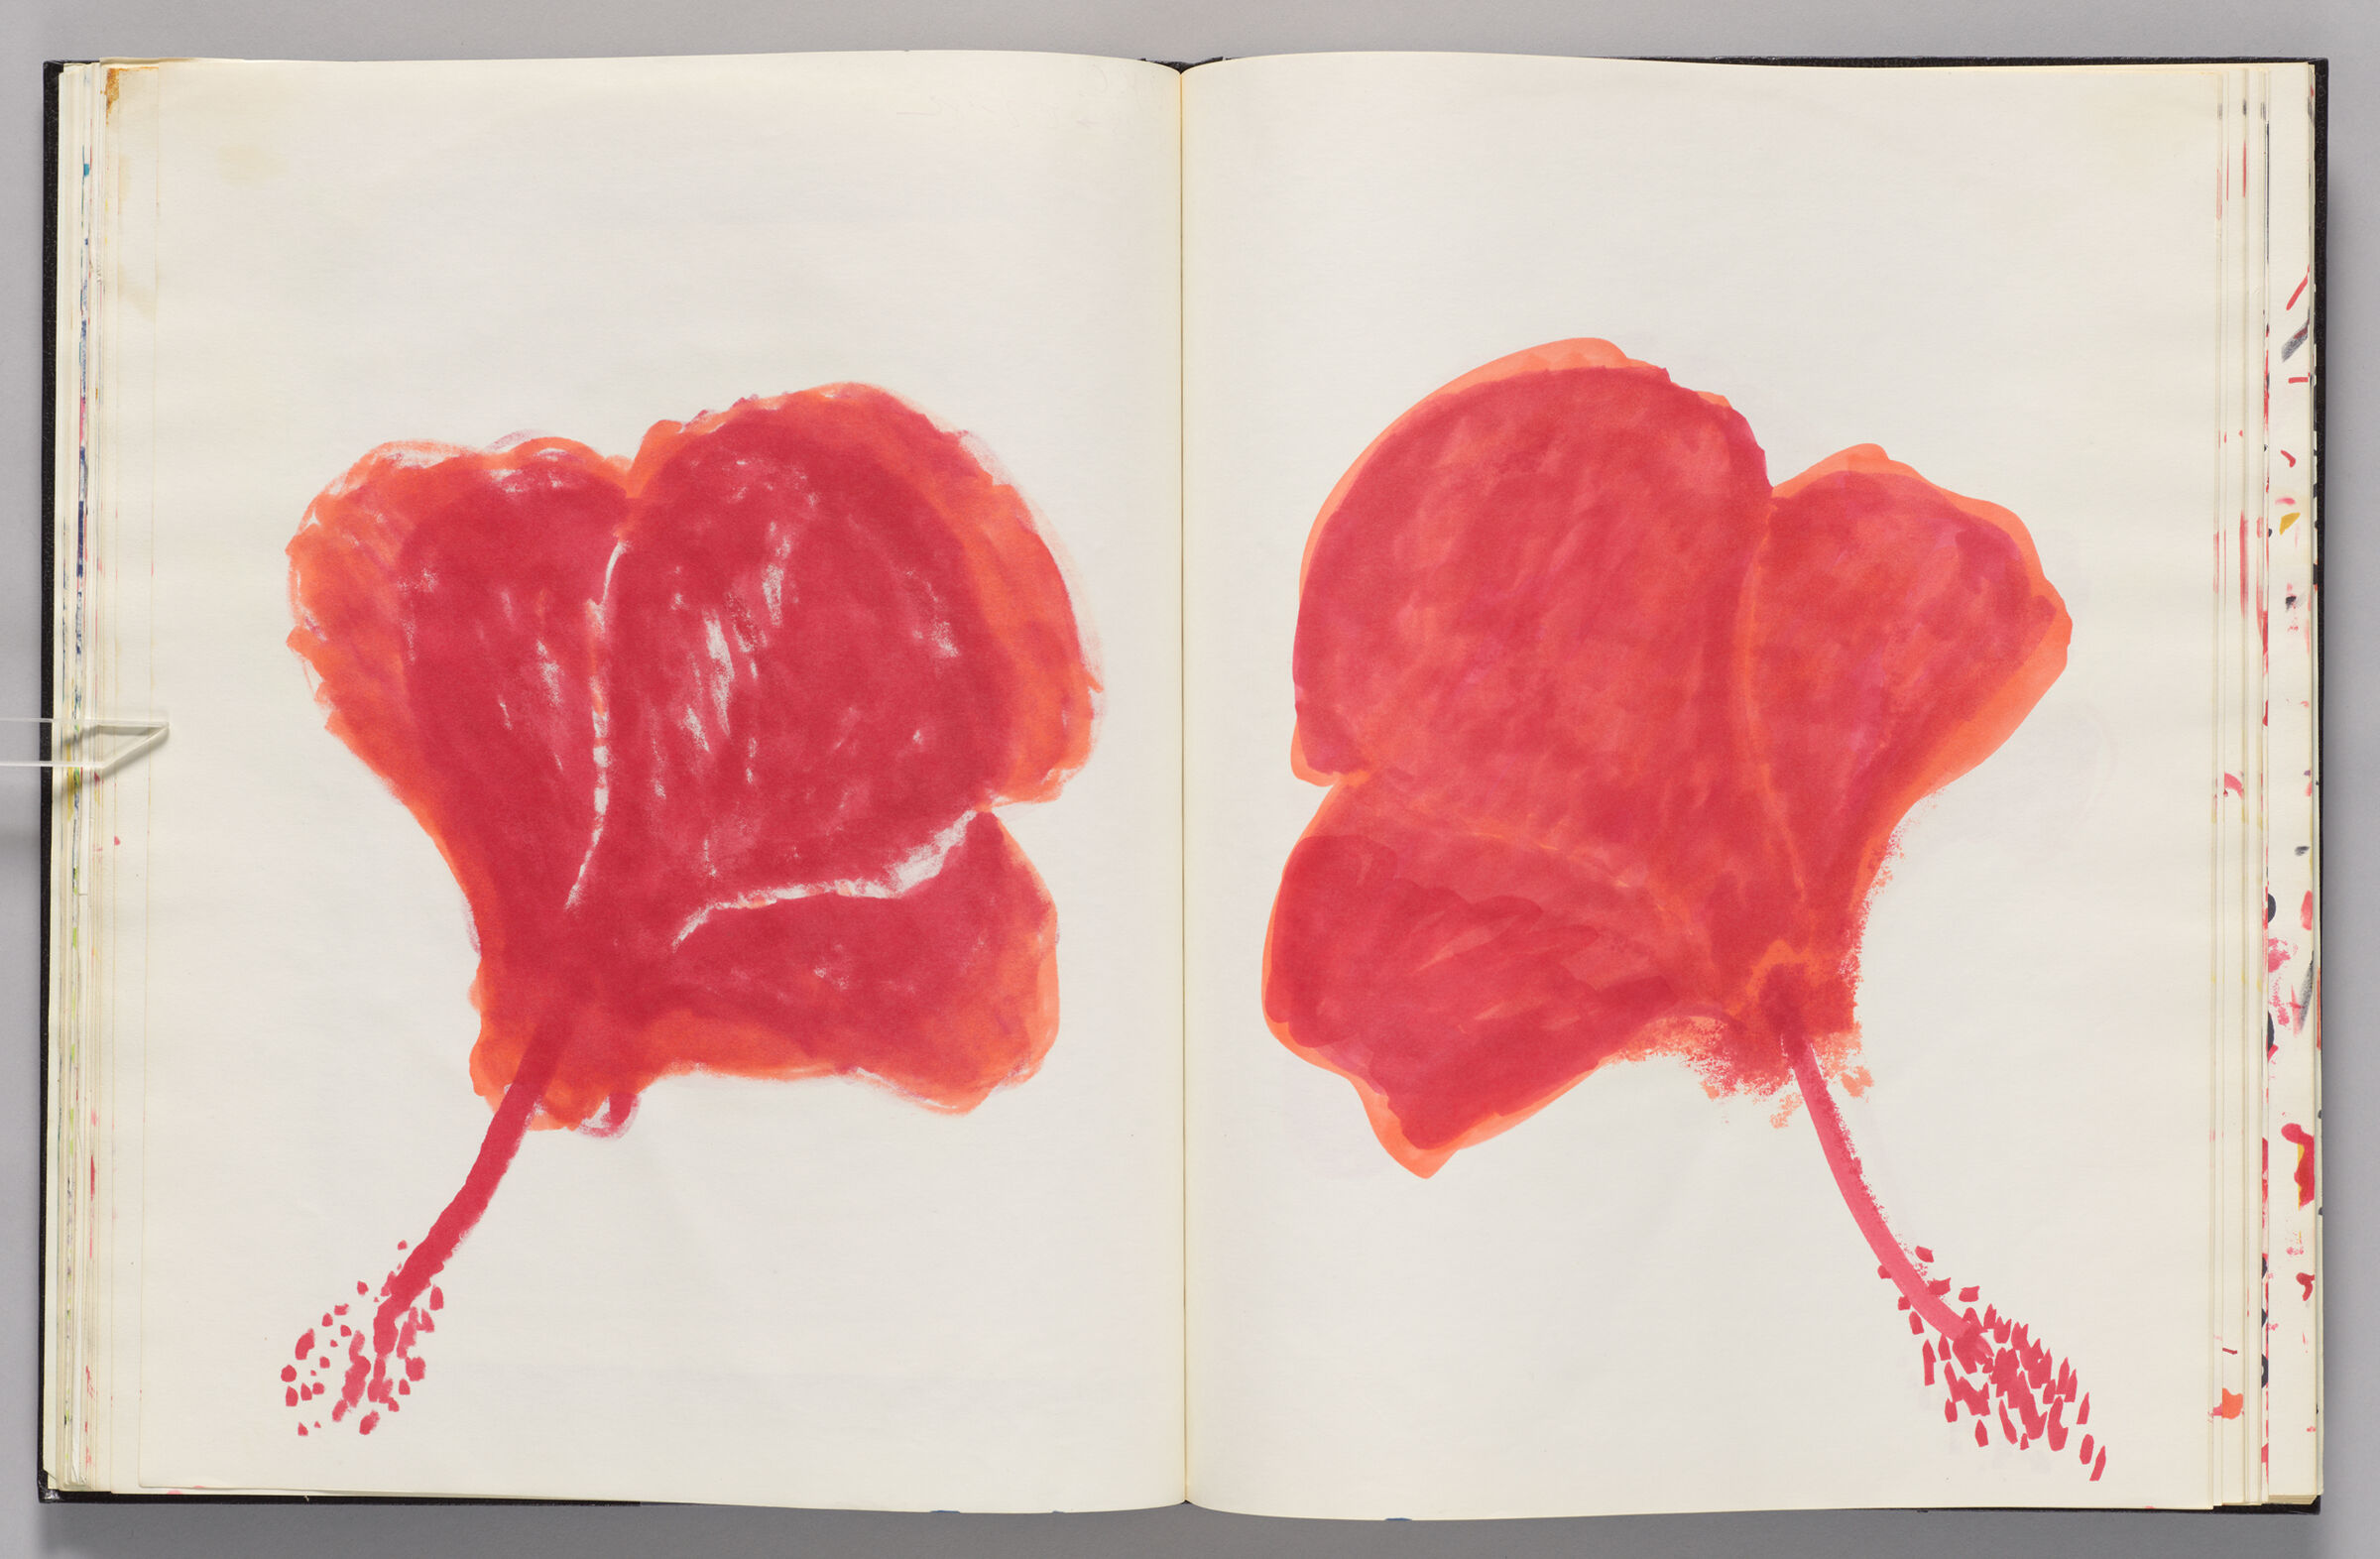 Untitled (Hibiscus Over Bleed-Through From Previous Page, Left Page); Untitled (Hibiscus, Right Page)